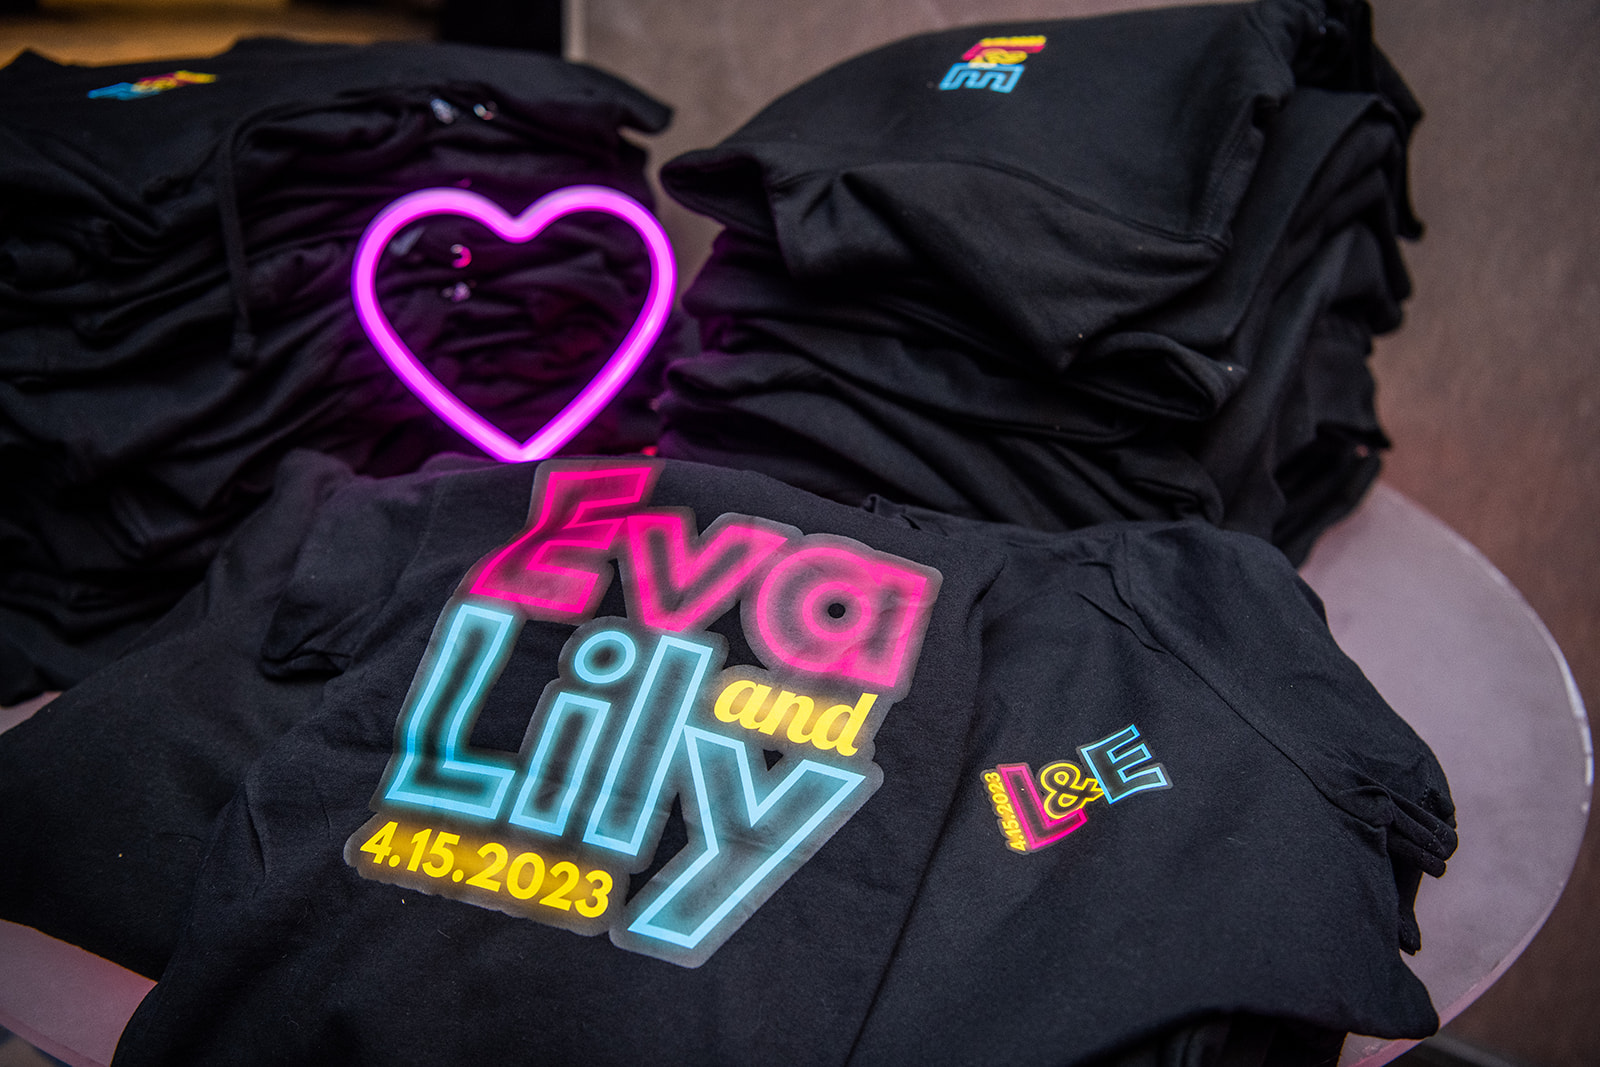 Logo Sweatshirts at Eva and Lily's Glowing Bat Mitzvah Party at the Bethesdan Hotel | Pop Color Events | Adding a Pop of Color to Bar & Bat Mitzvahs in DC, MD & VA | Photo by: Ana Isabel Photography